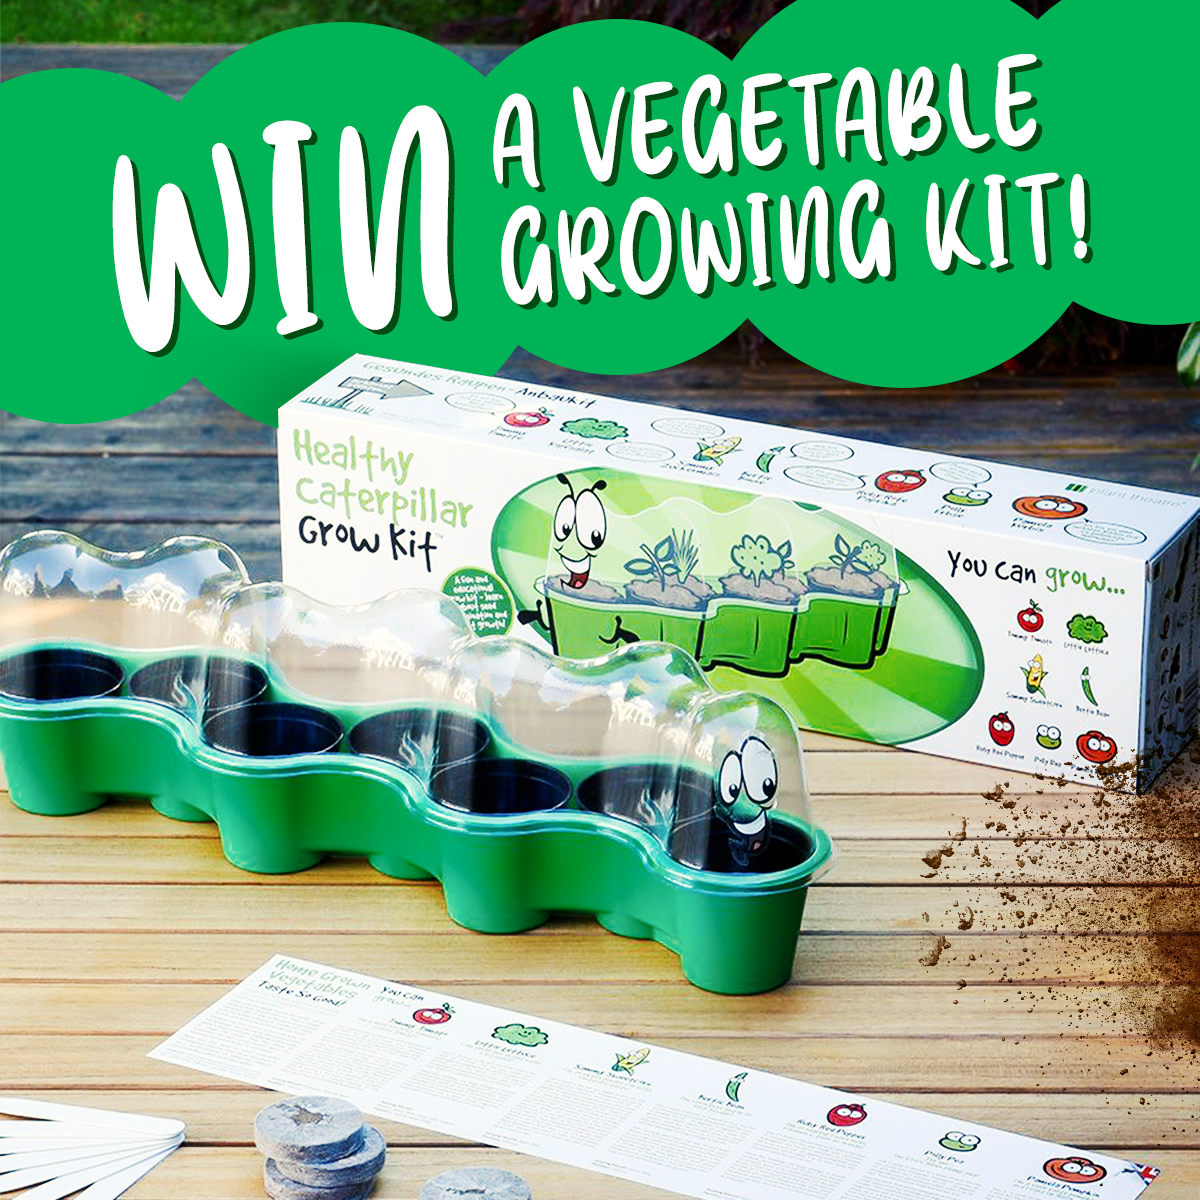 Competition: Win 1 of 20 Vegetable Growing Kits!